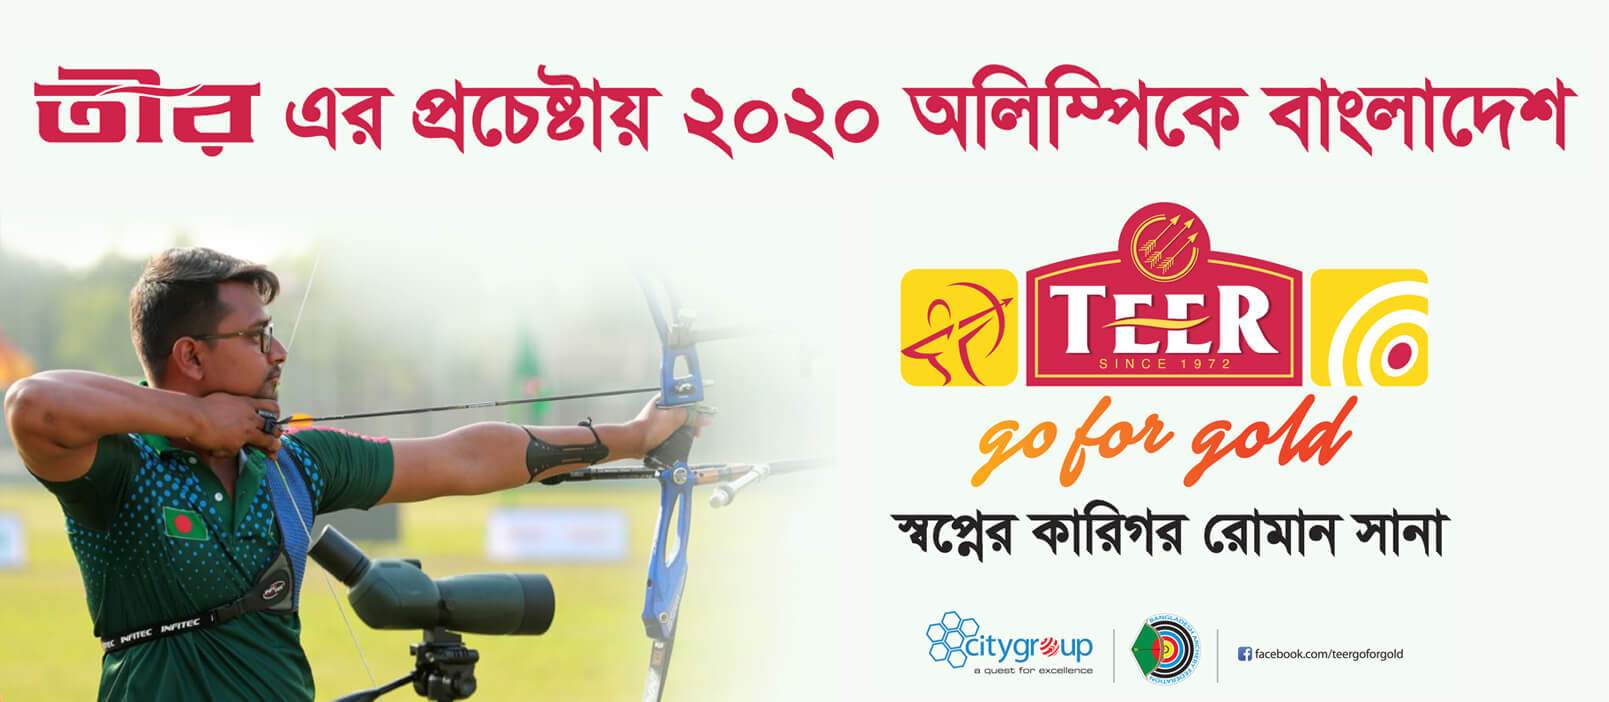 Teer- Go for Gold | A Campaign That Is Making Bangladesh Proud-Markedium